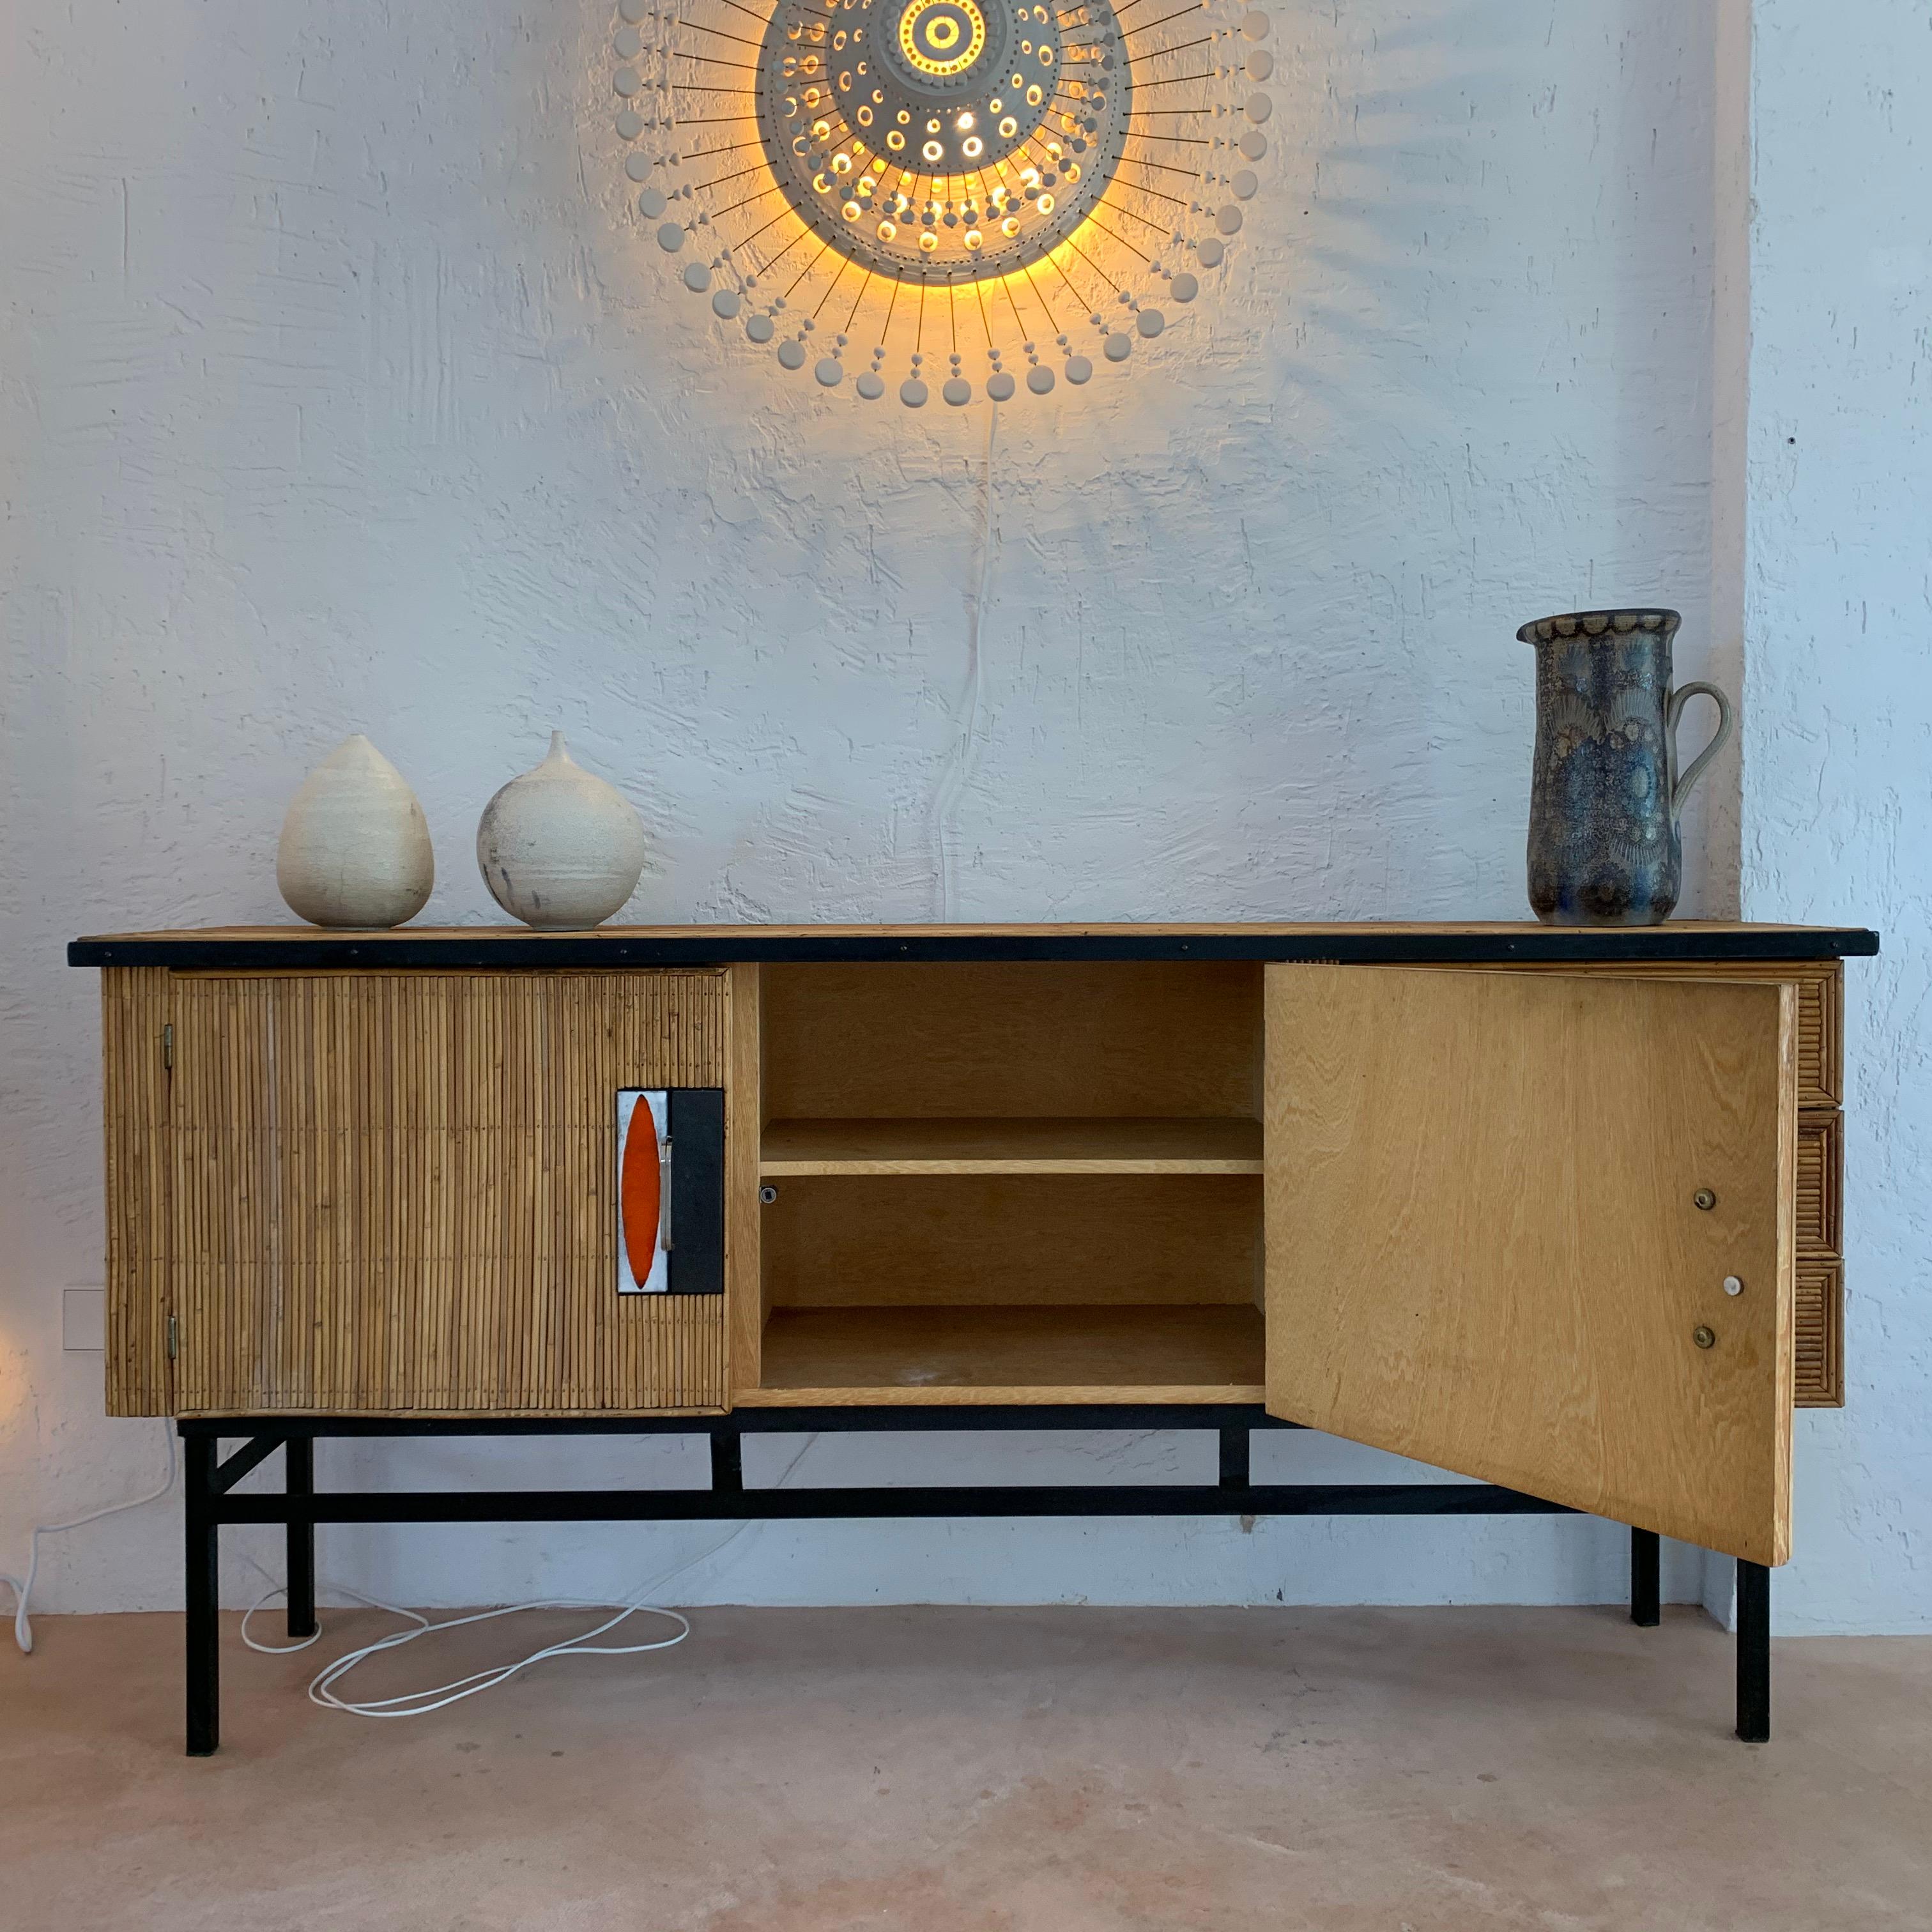 Audoux & Minet with Roger Capron Ceramic Tiles Sideboard in Rattan & metal, 1950 In Good Condition In Santa Gertrudis, Baleares